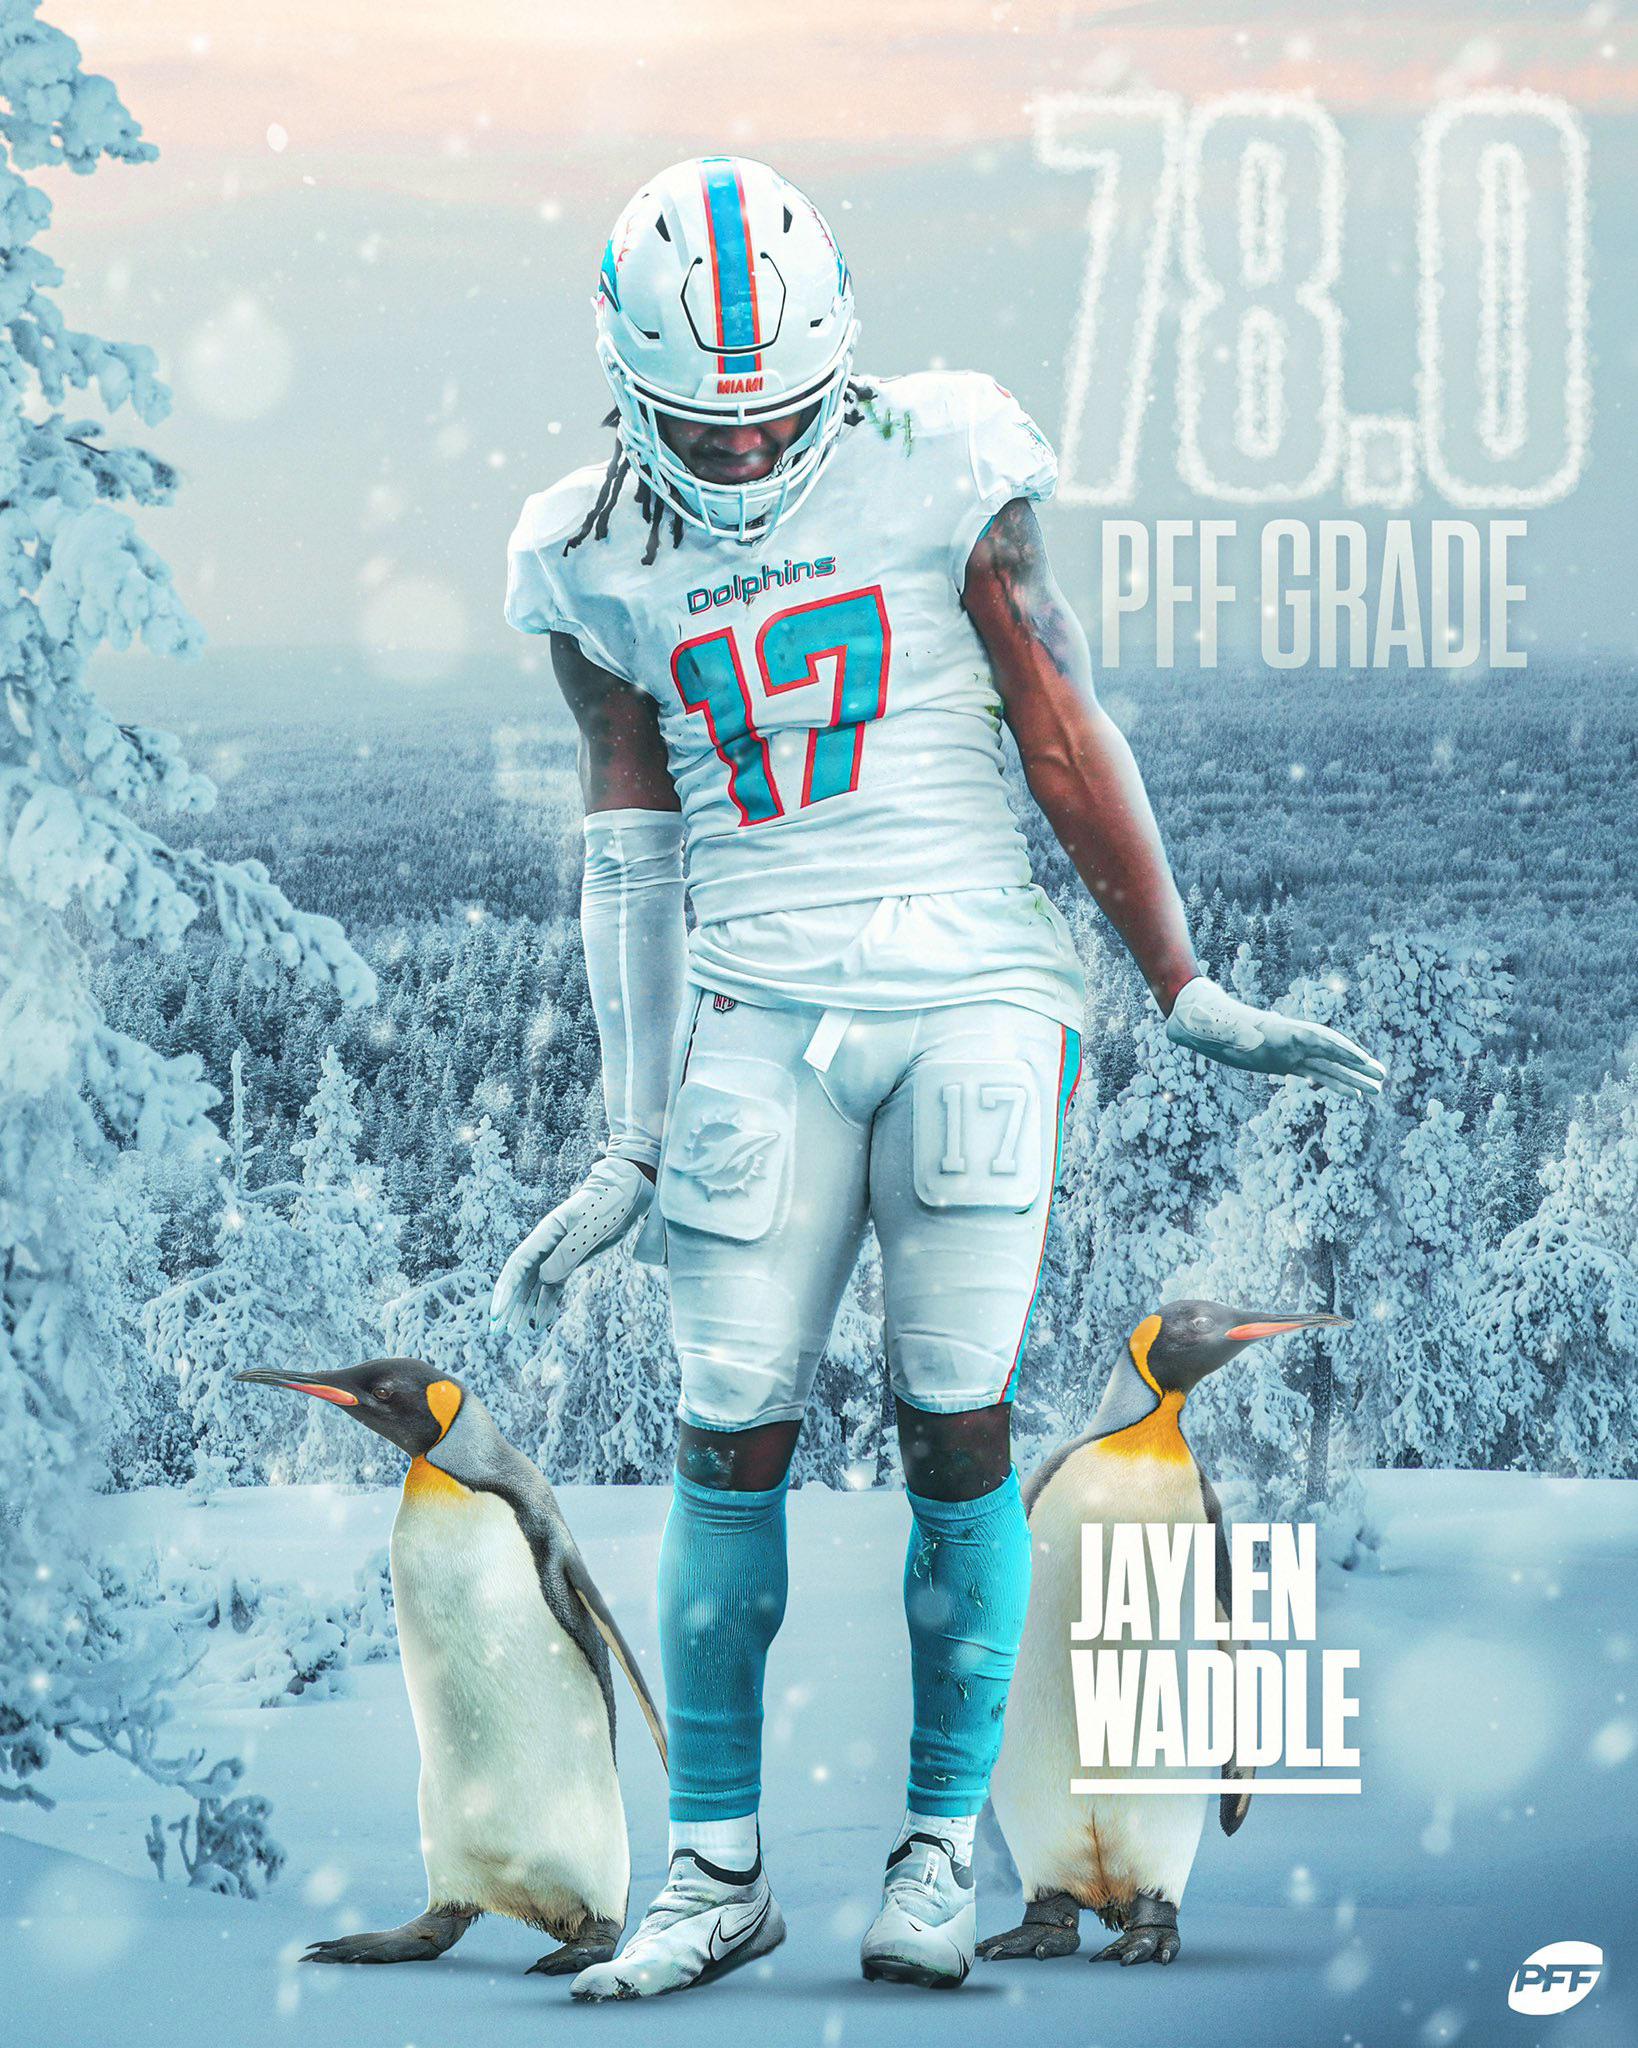 Miami Dolphins Wide Receiver Jaylen Waddle Erupted On The Season During His Rookie Year, Hauling In 104 Rec For 015 Yds And 6 TD's. Now, He'll Have A Specifically Offensive Minded Head Coach